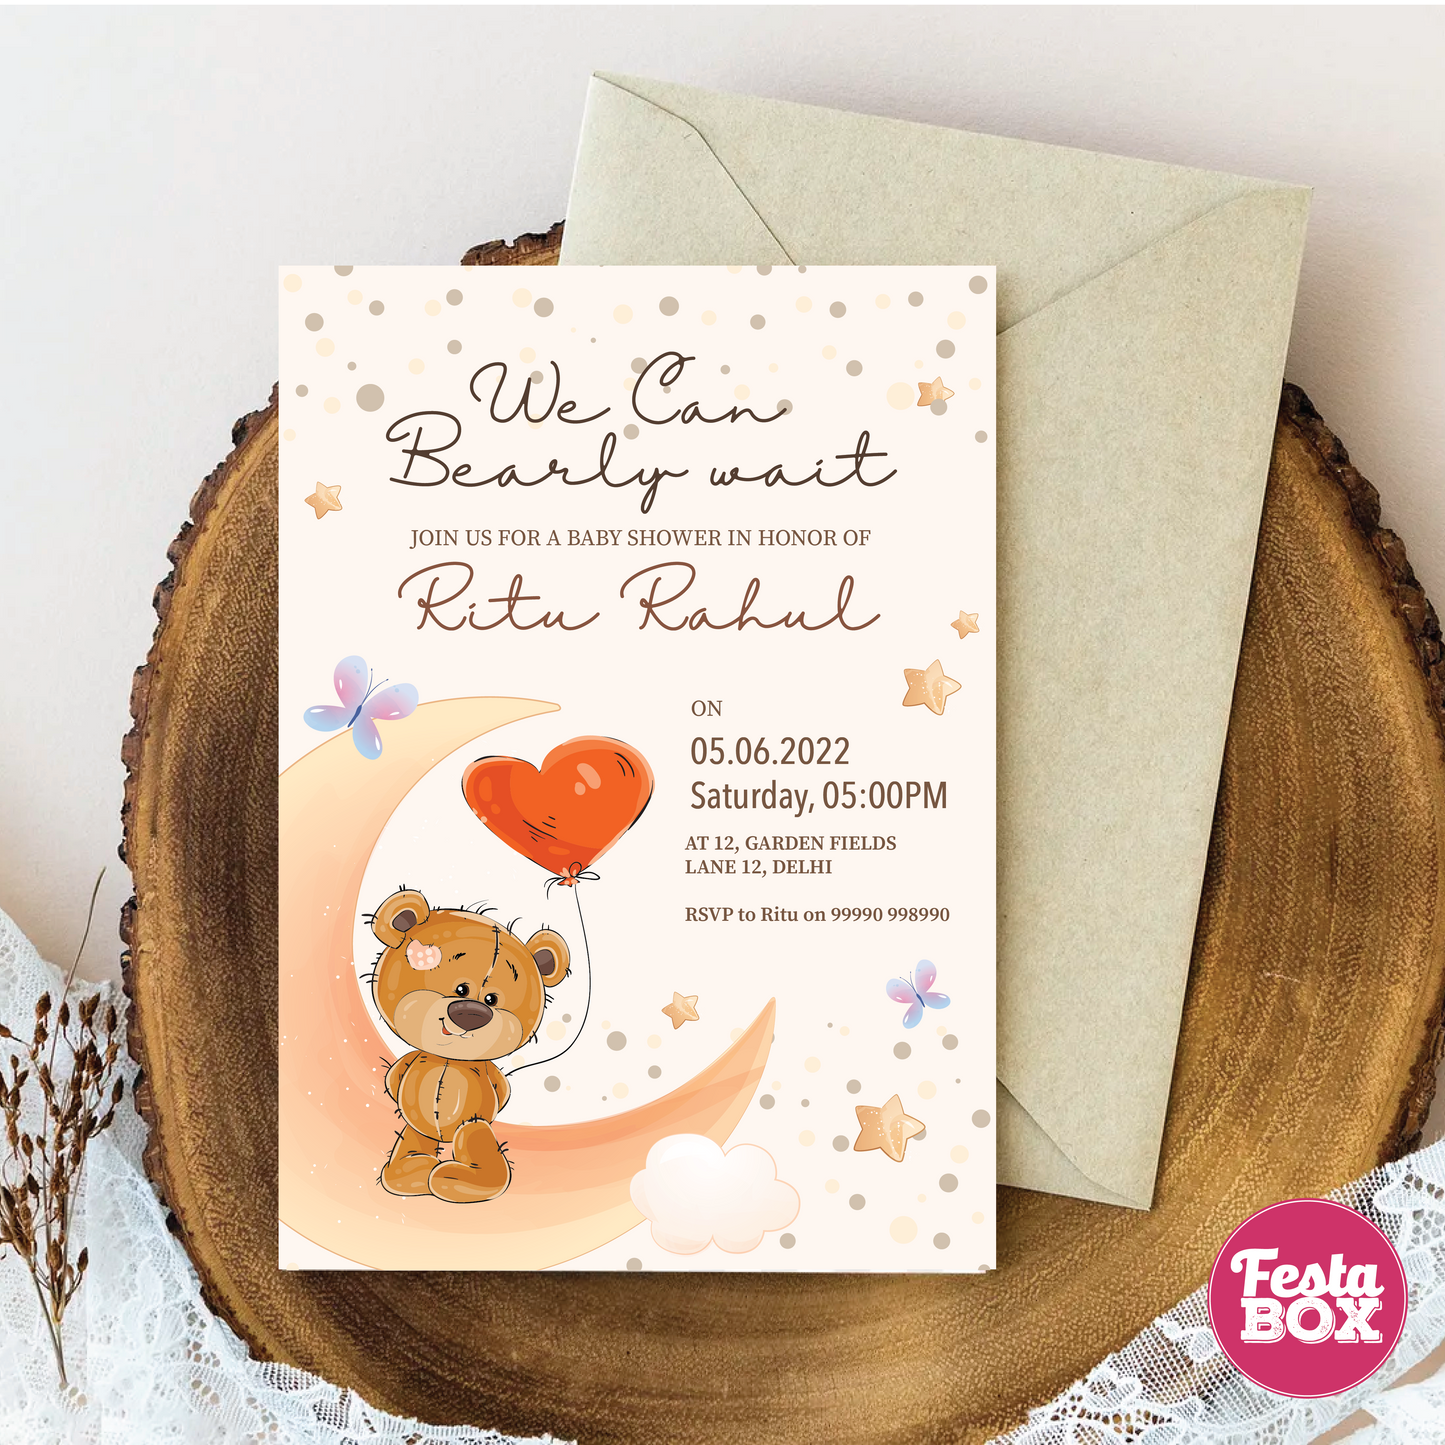 Baby Shower Invitation under the Teddy Bear Collection by Festabox